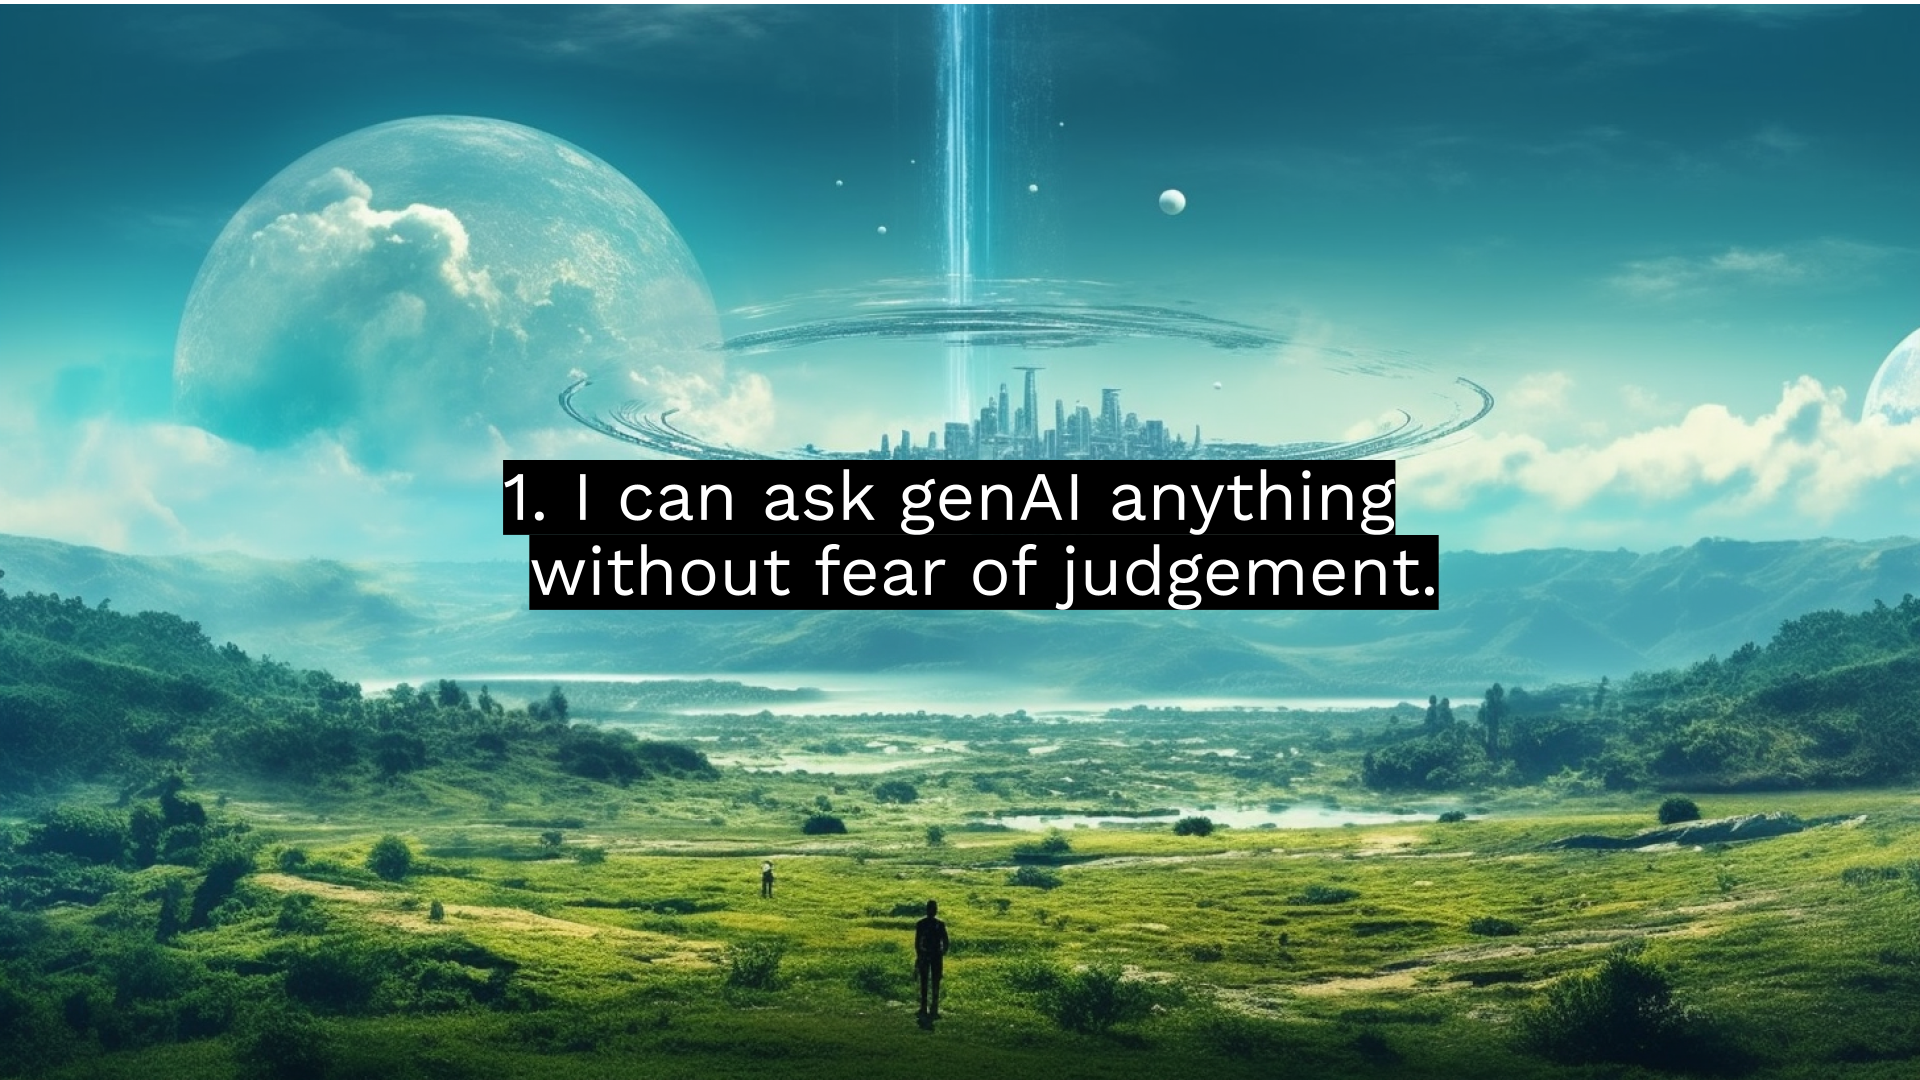 Using AI in the workplace creates a strange proxy for psychological safety by removing human agendas from the interaction. Image: A human figure looks out at a futuristic landscape superimposed the phrase: "I can ask anything without fear of judgment." | August Public